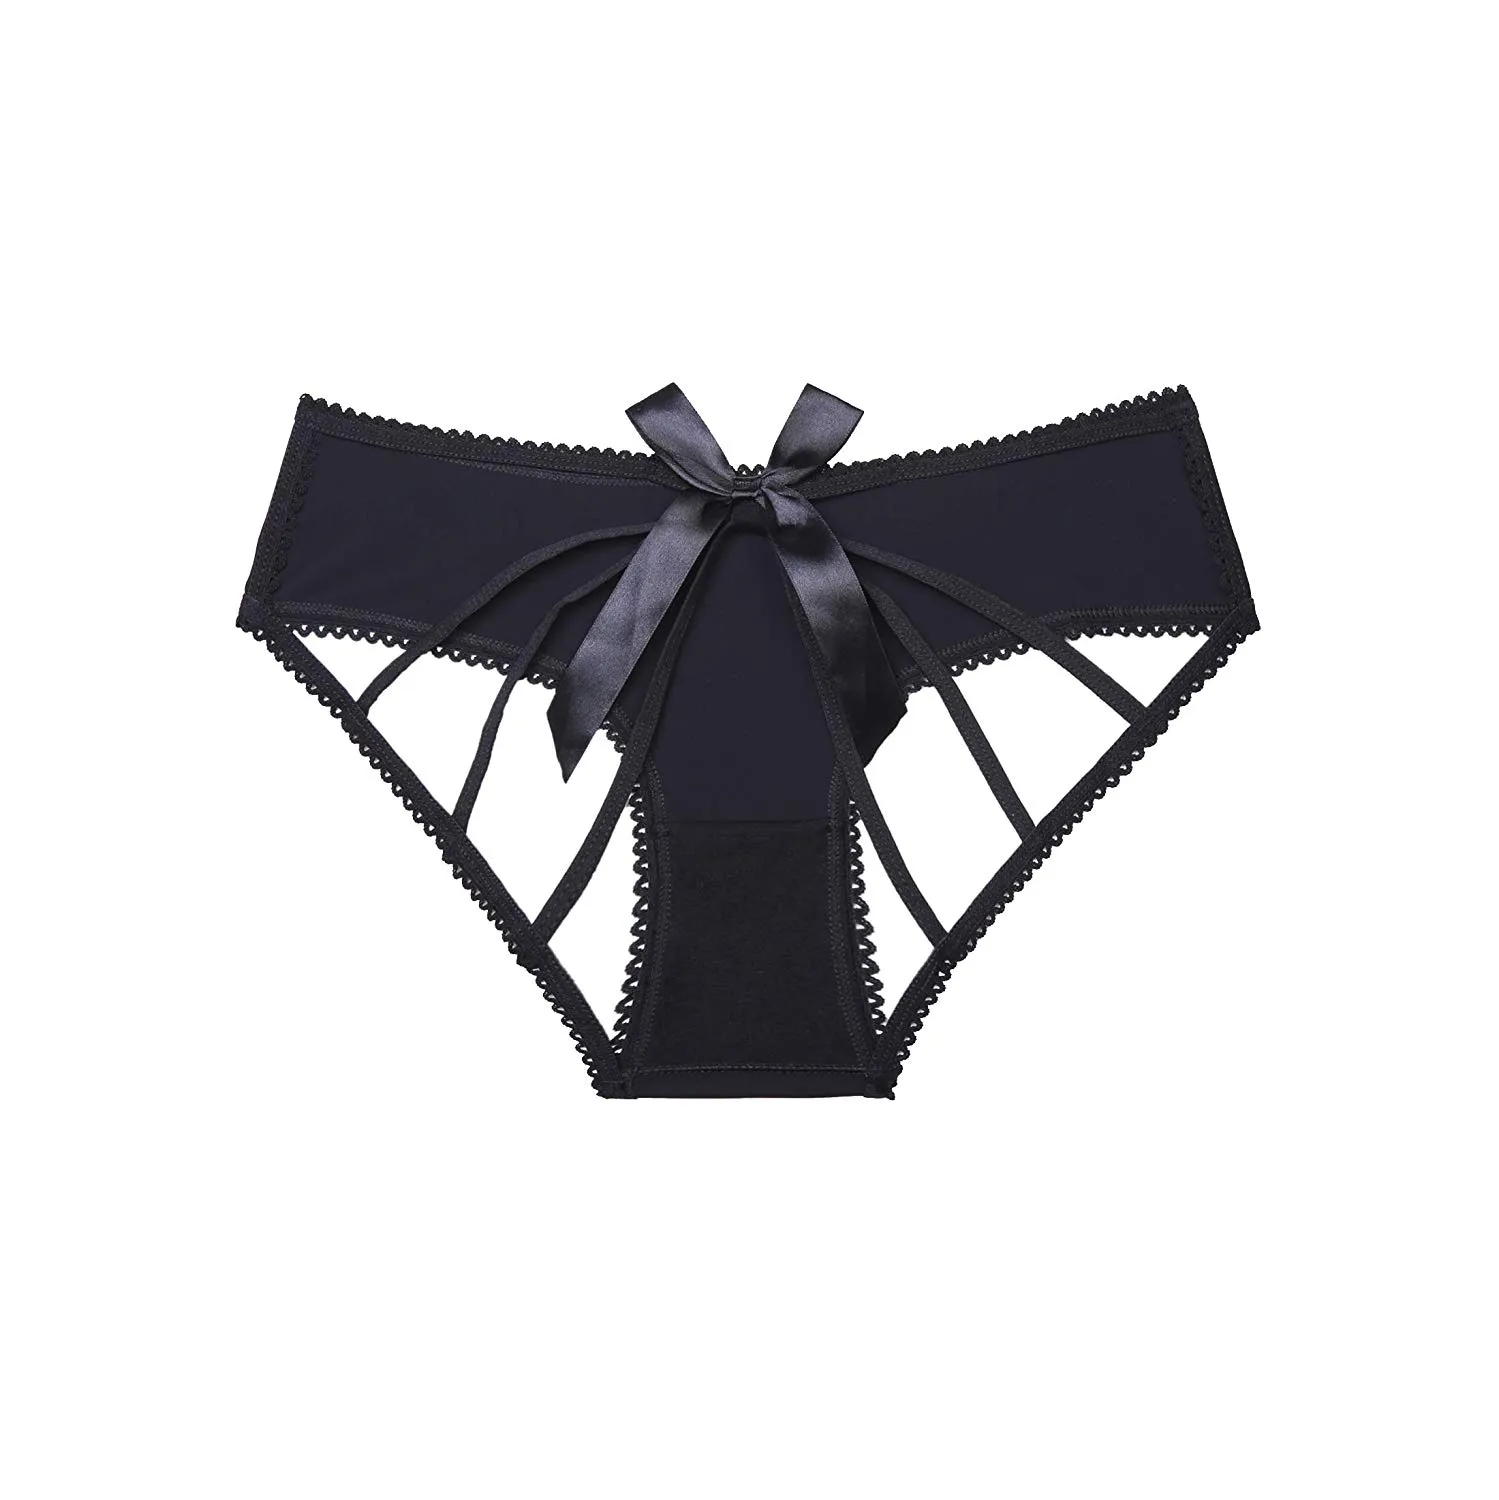 Sexy Low Waist Cheeky Bow Sexy Crotchless Panties For Women Black/Pink From  Piaojun2017, $3.52